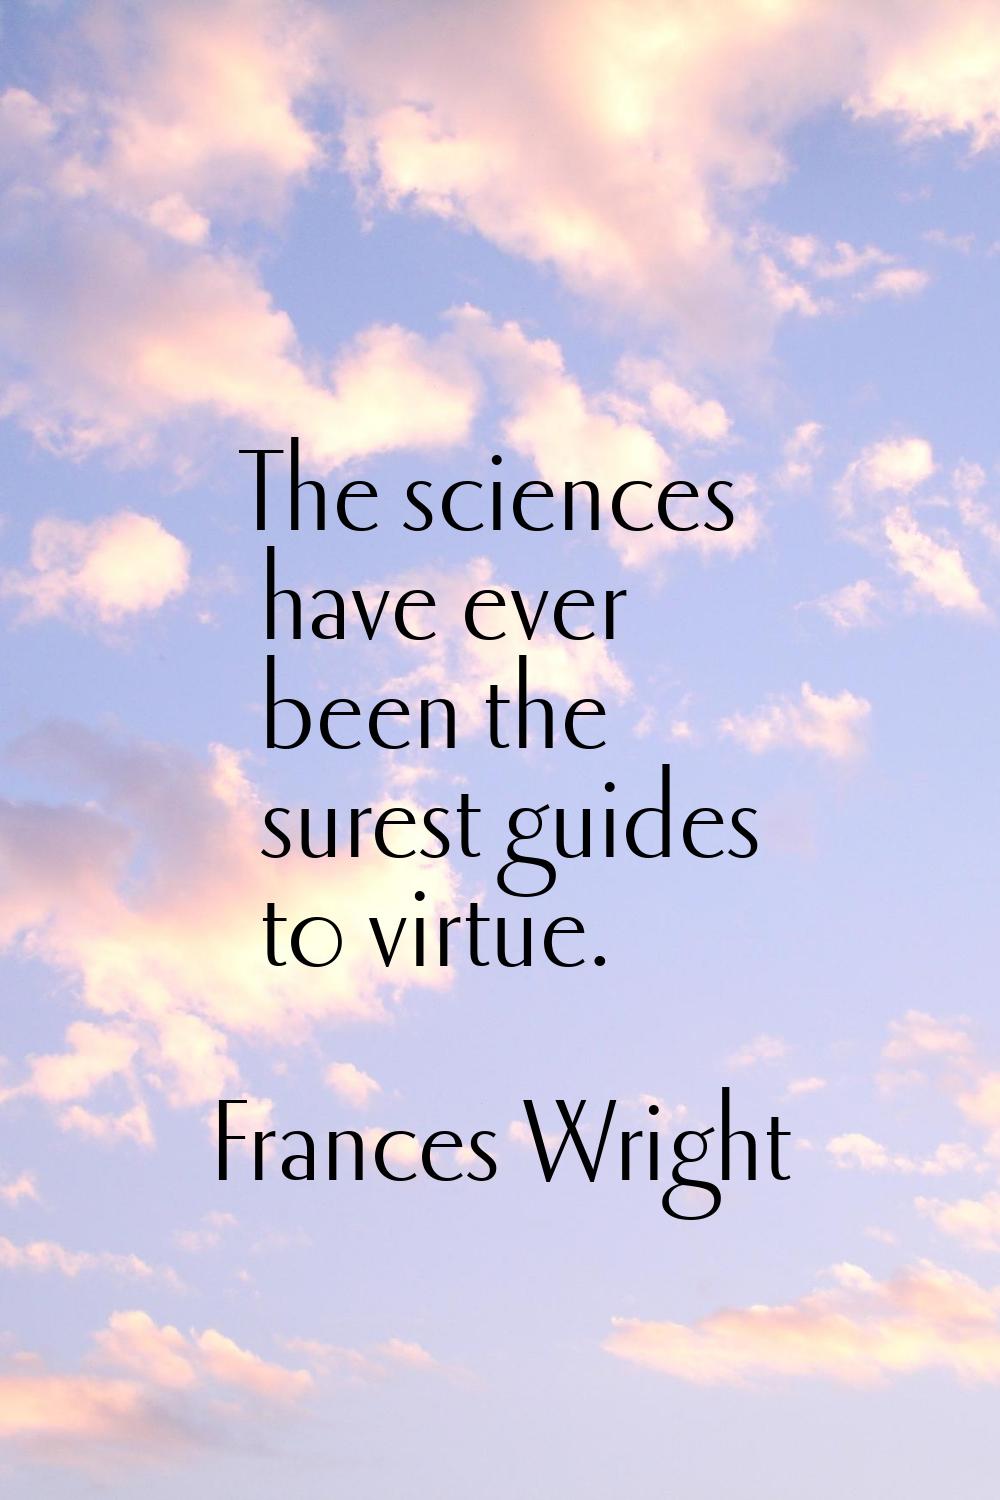 The sciences have ever been the surest guides to virtue.